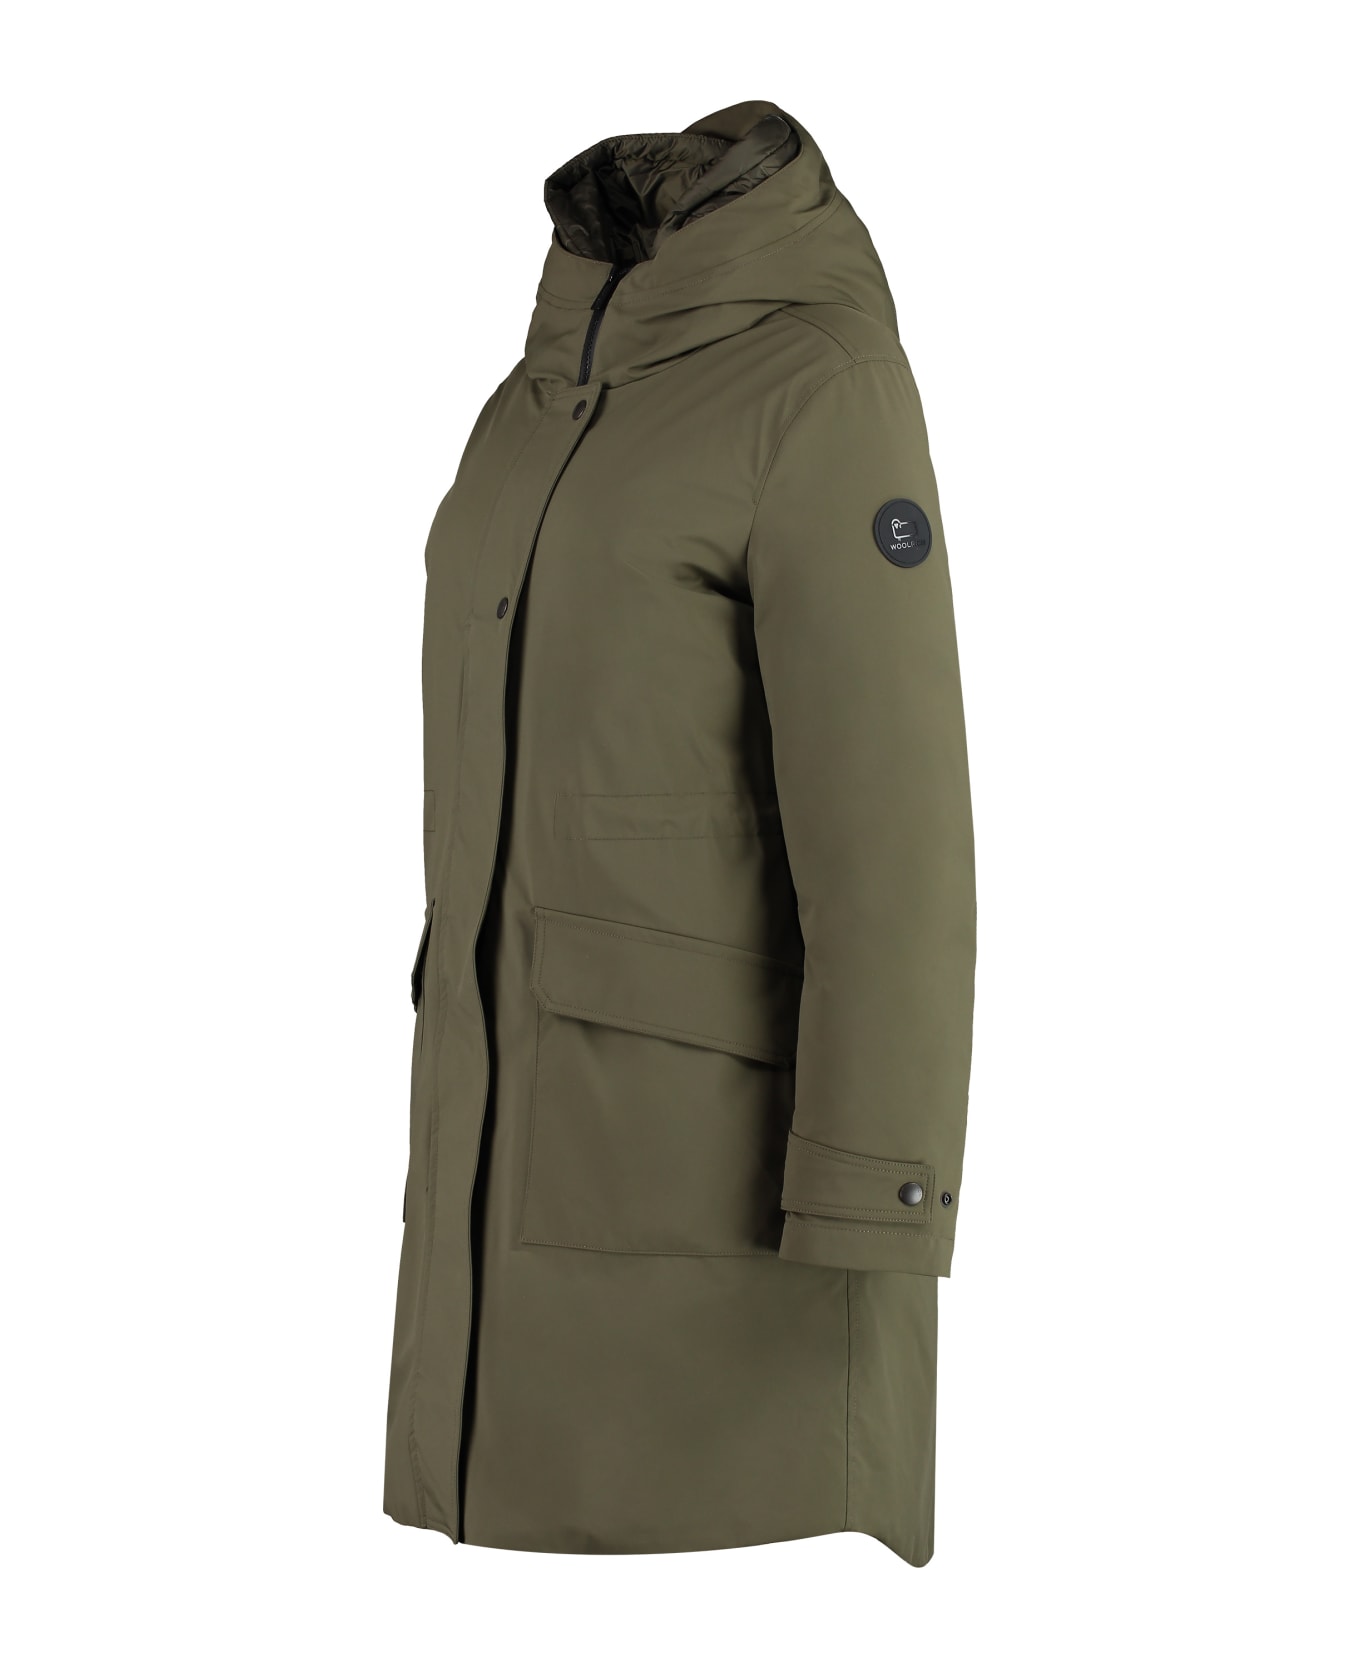 Woolrich Military Technical Fabric Parka With Internal Removable Down Jacket - green